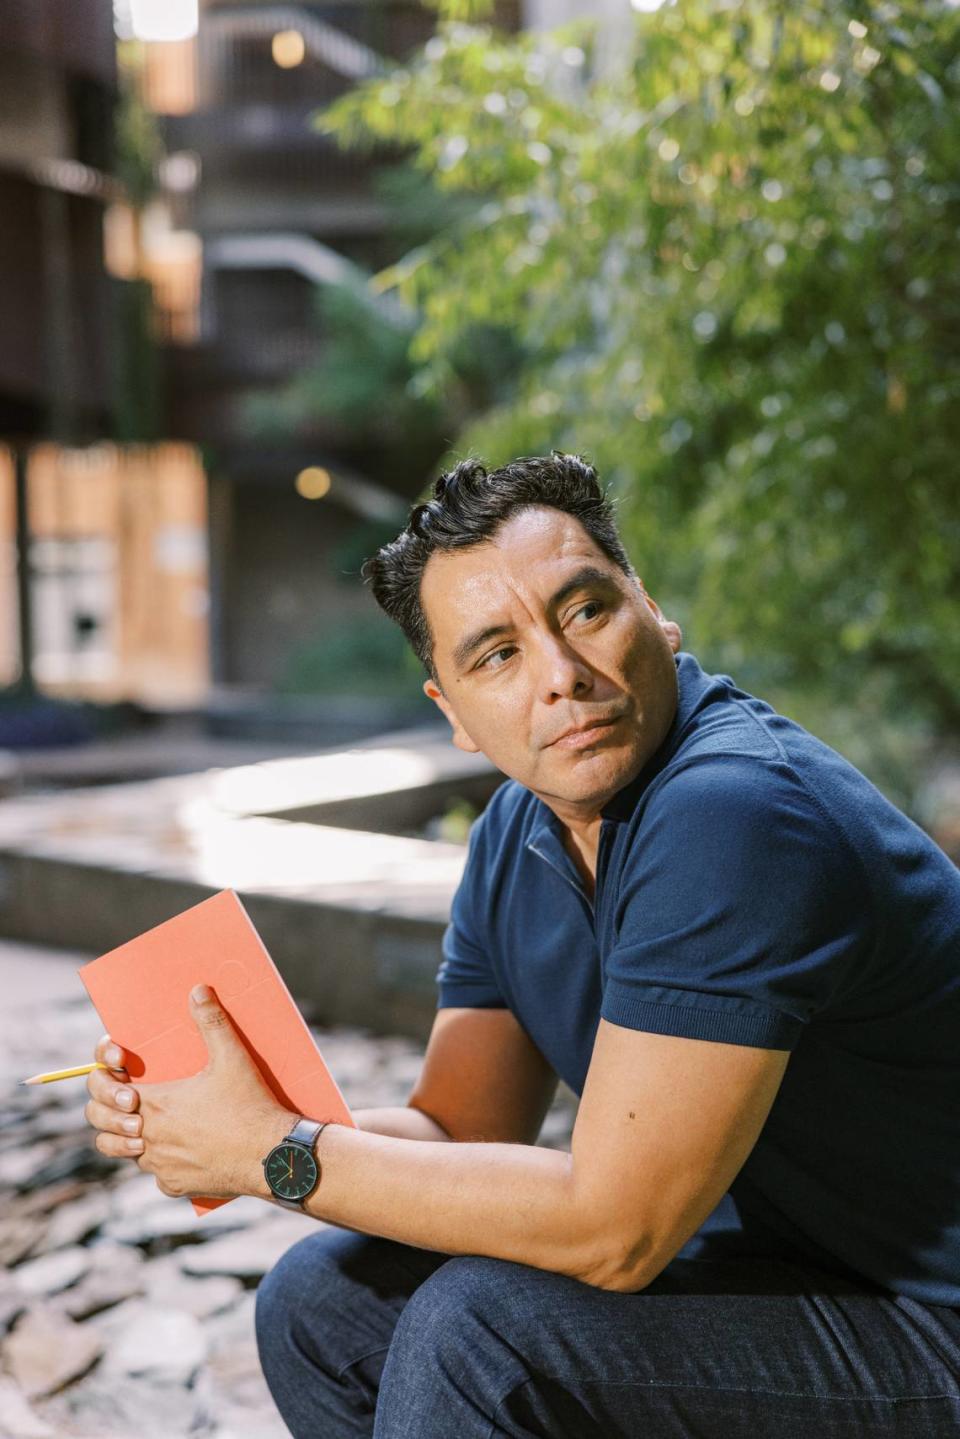 Central Valley-born fiction writer Manuel Muñoz wins prestigious MacArthur Foundation award for “depicting with empathy and nuance the Mexican American communities of California’s Central Valley.”